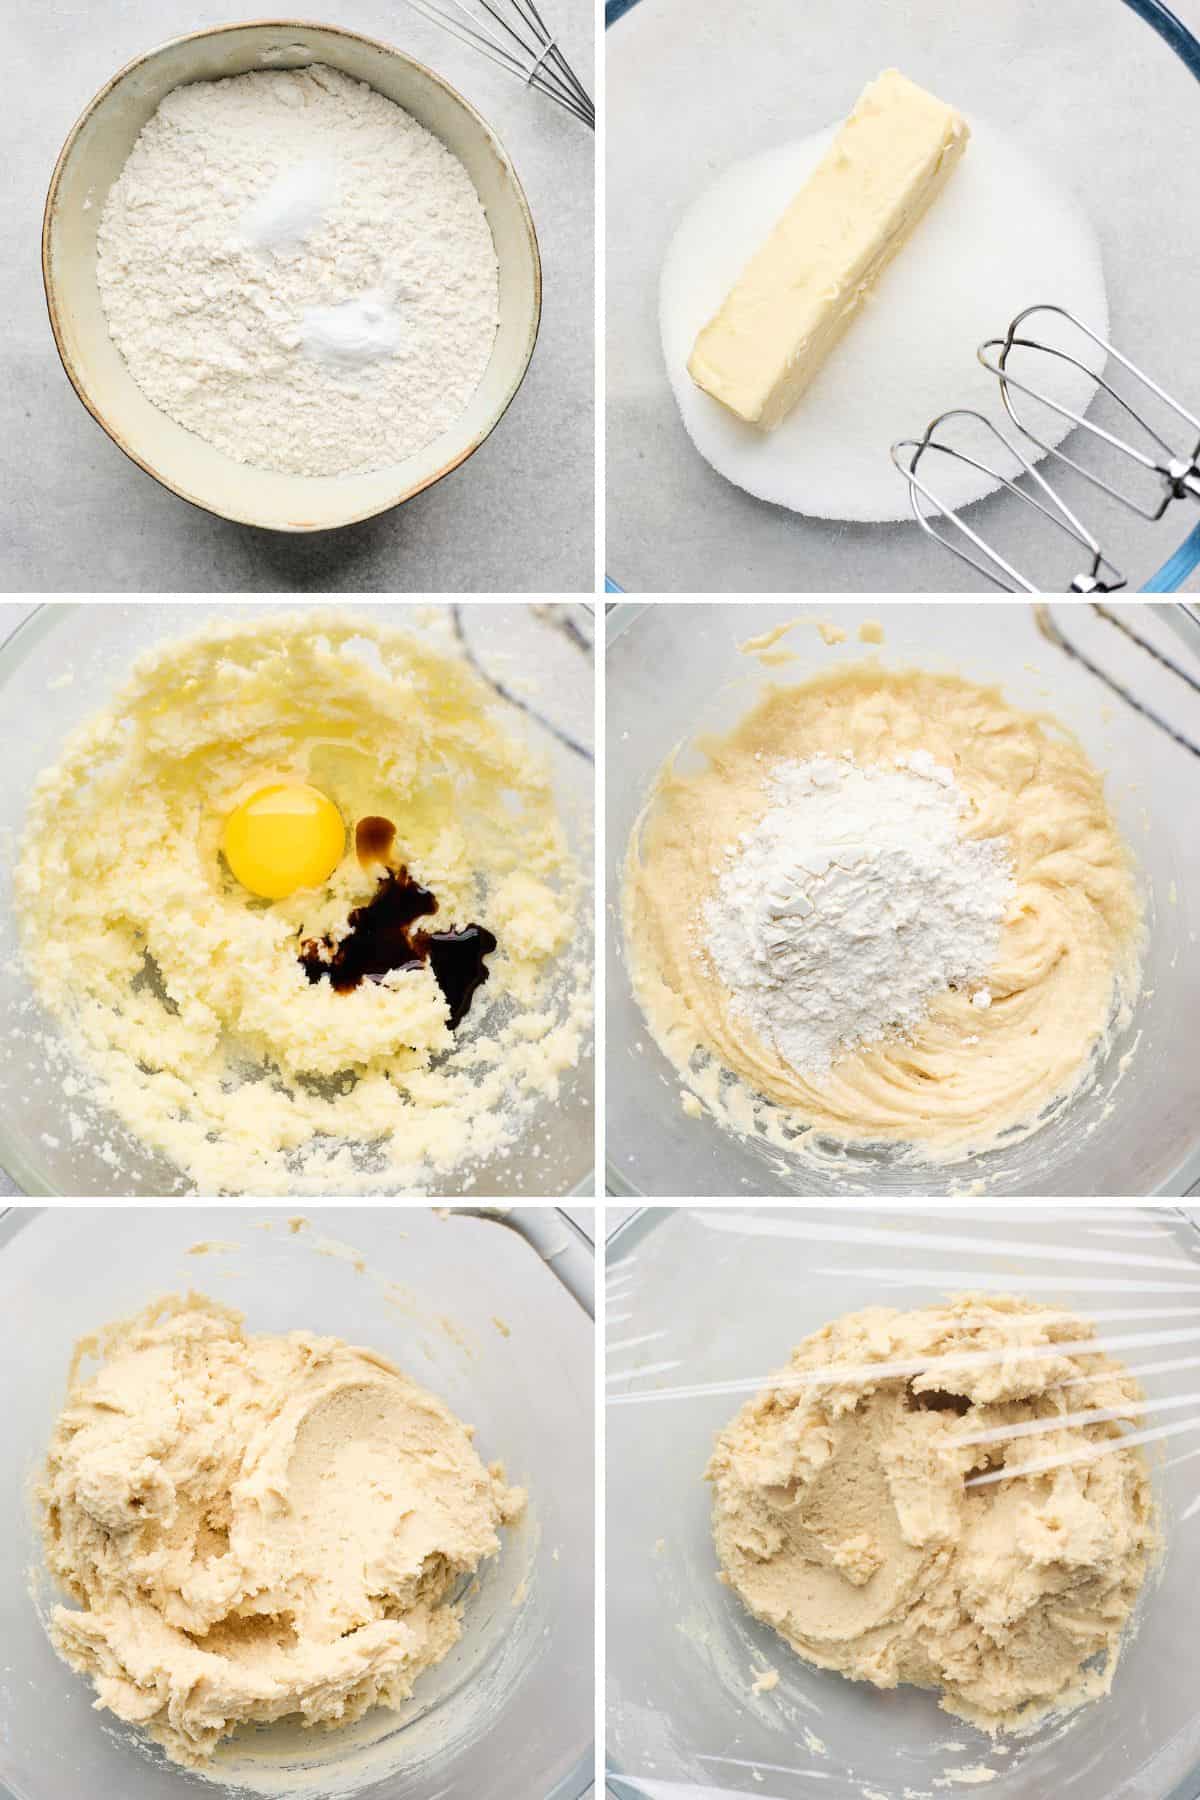 Collage of images showing the process of mixing the cookie dough for making southern tea cakes.